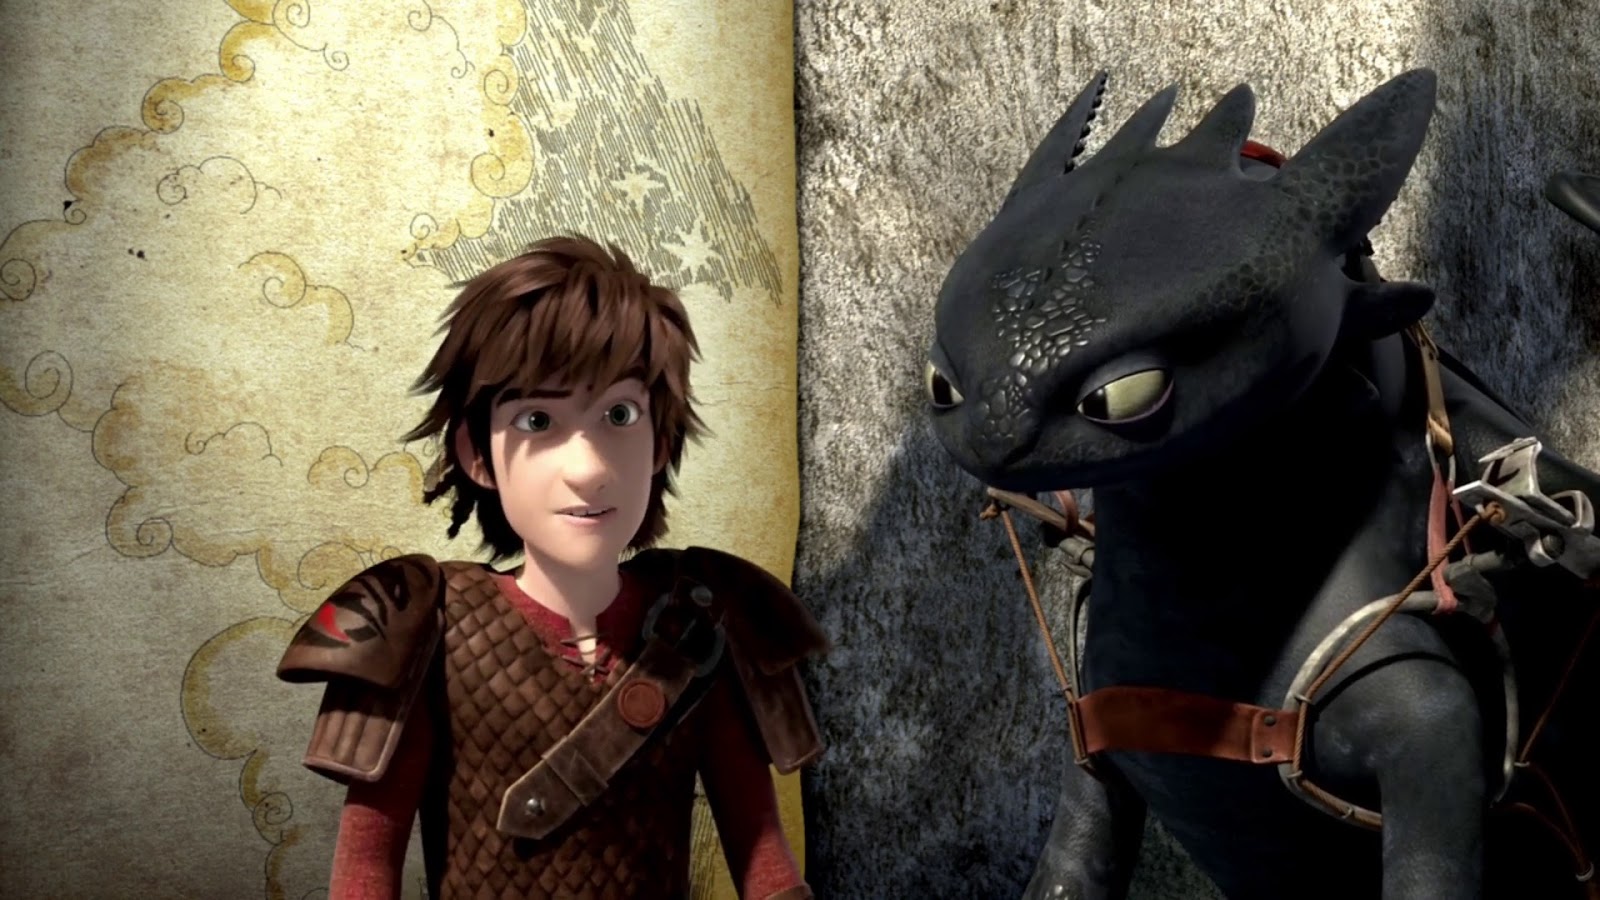  Hiccup, Toothless and the Dragon Riders soar to the edge of adventure